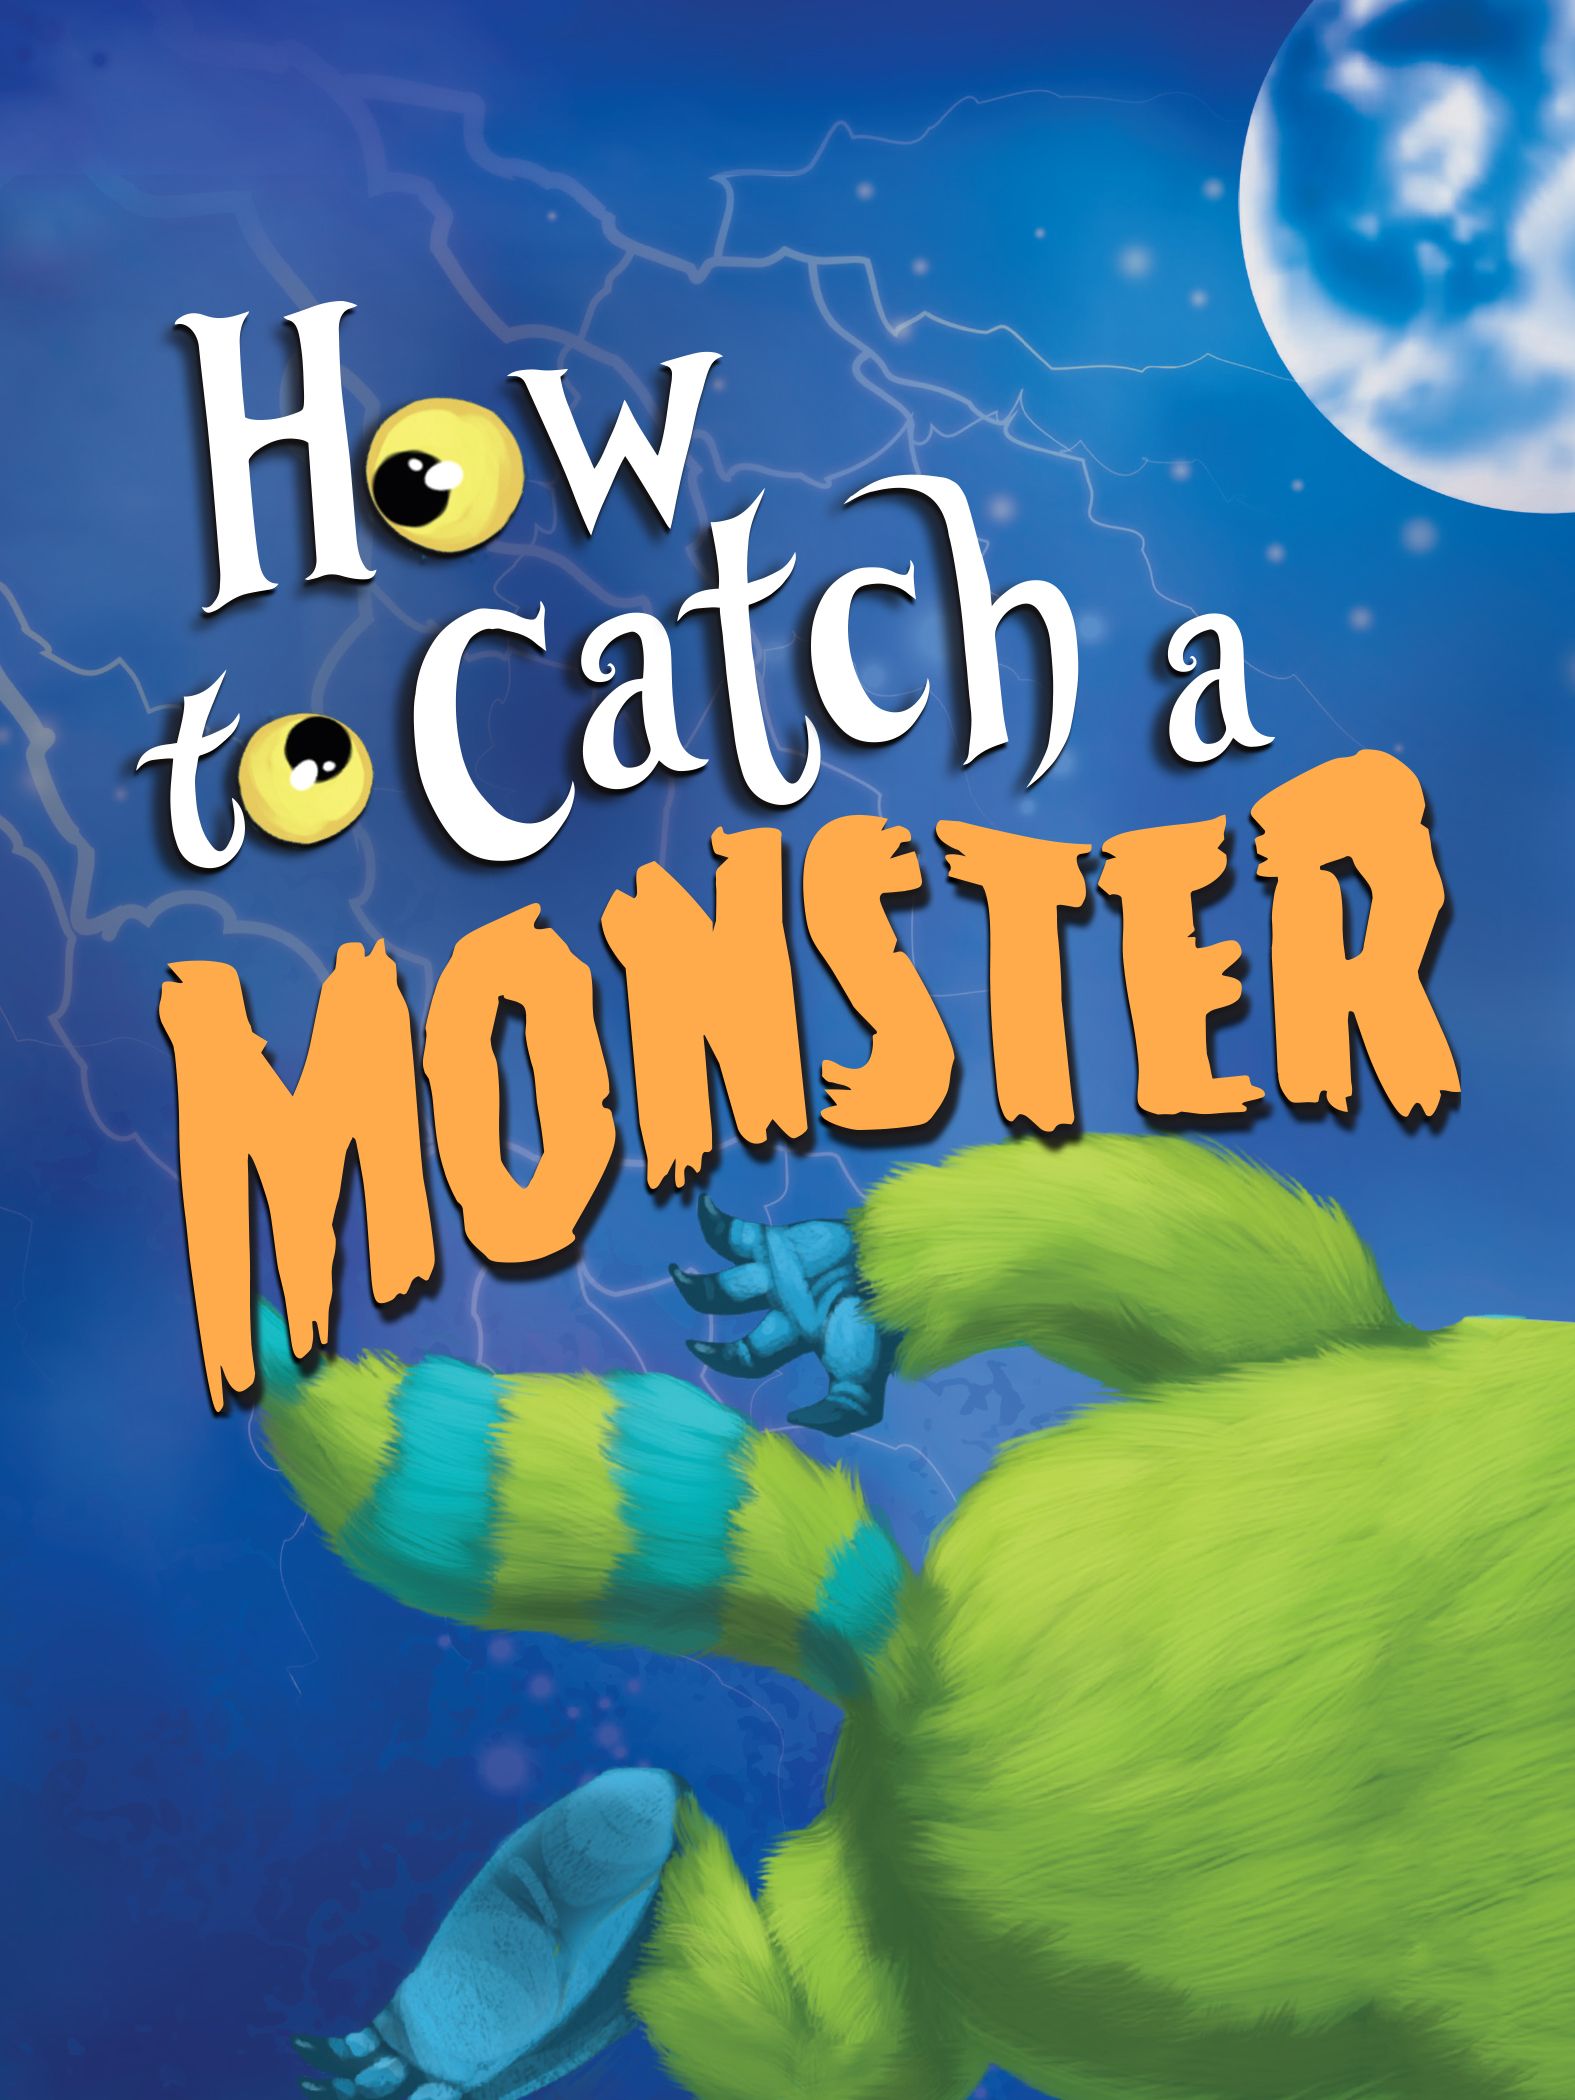 How to Catch a Monster